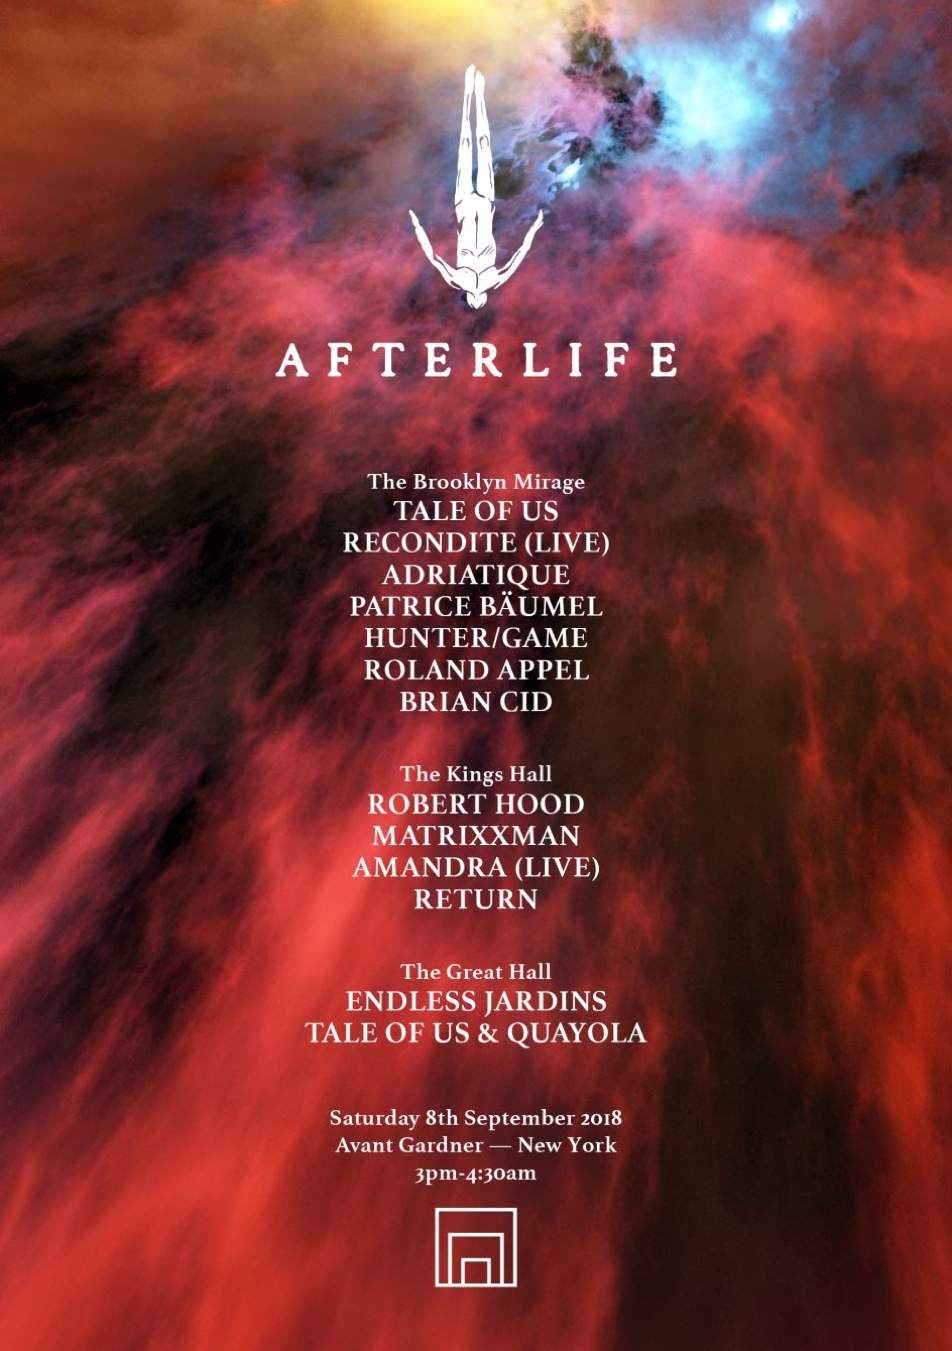 Tale Of Us announce lineup for Afterlife party at Brooklyn Mirage in New York image